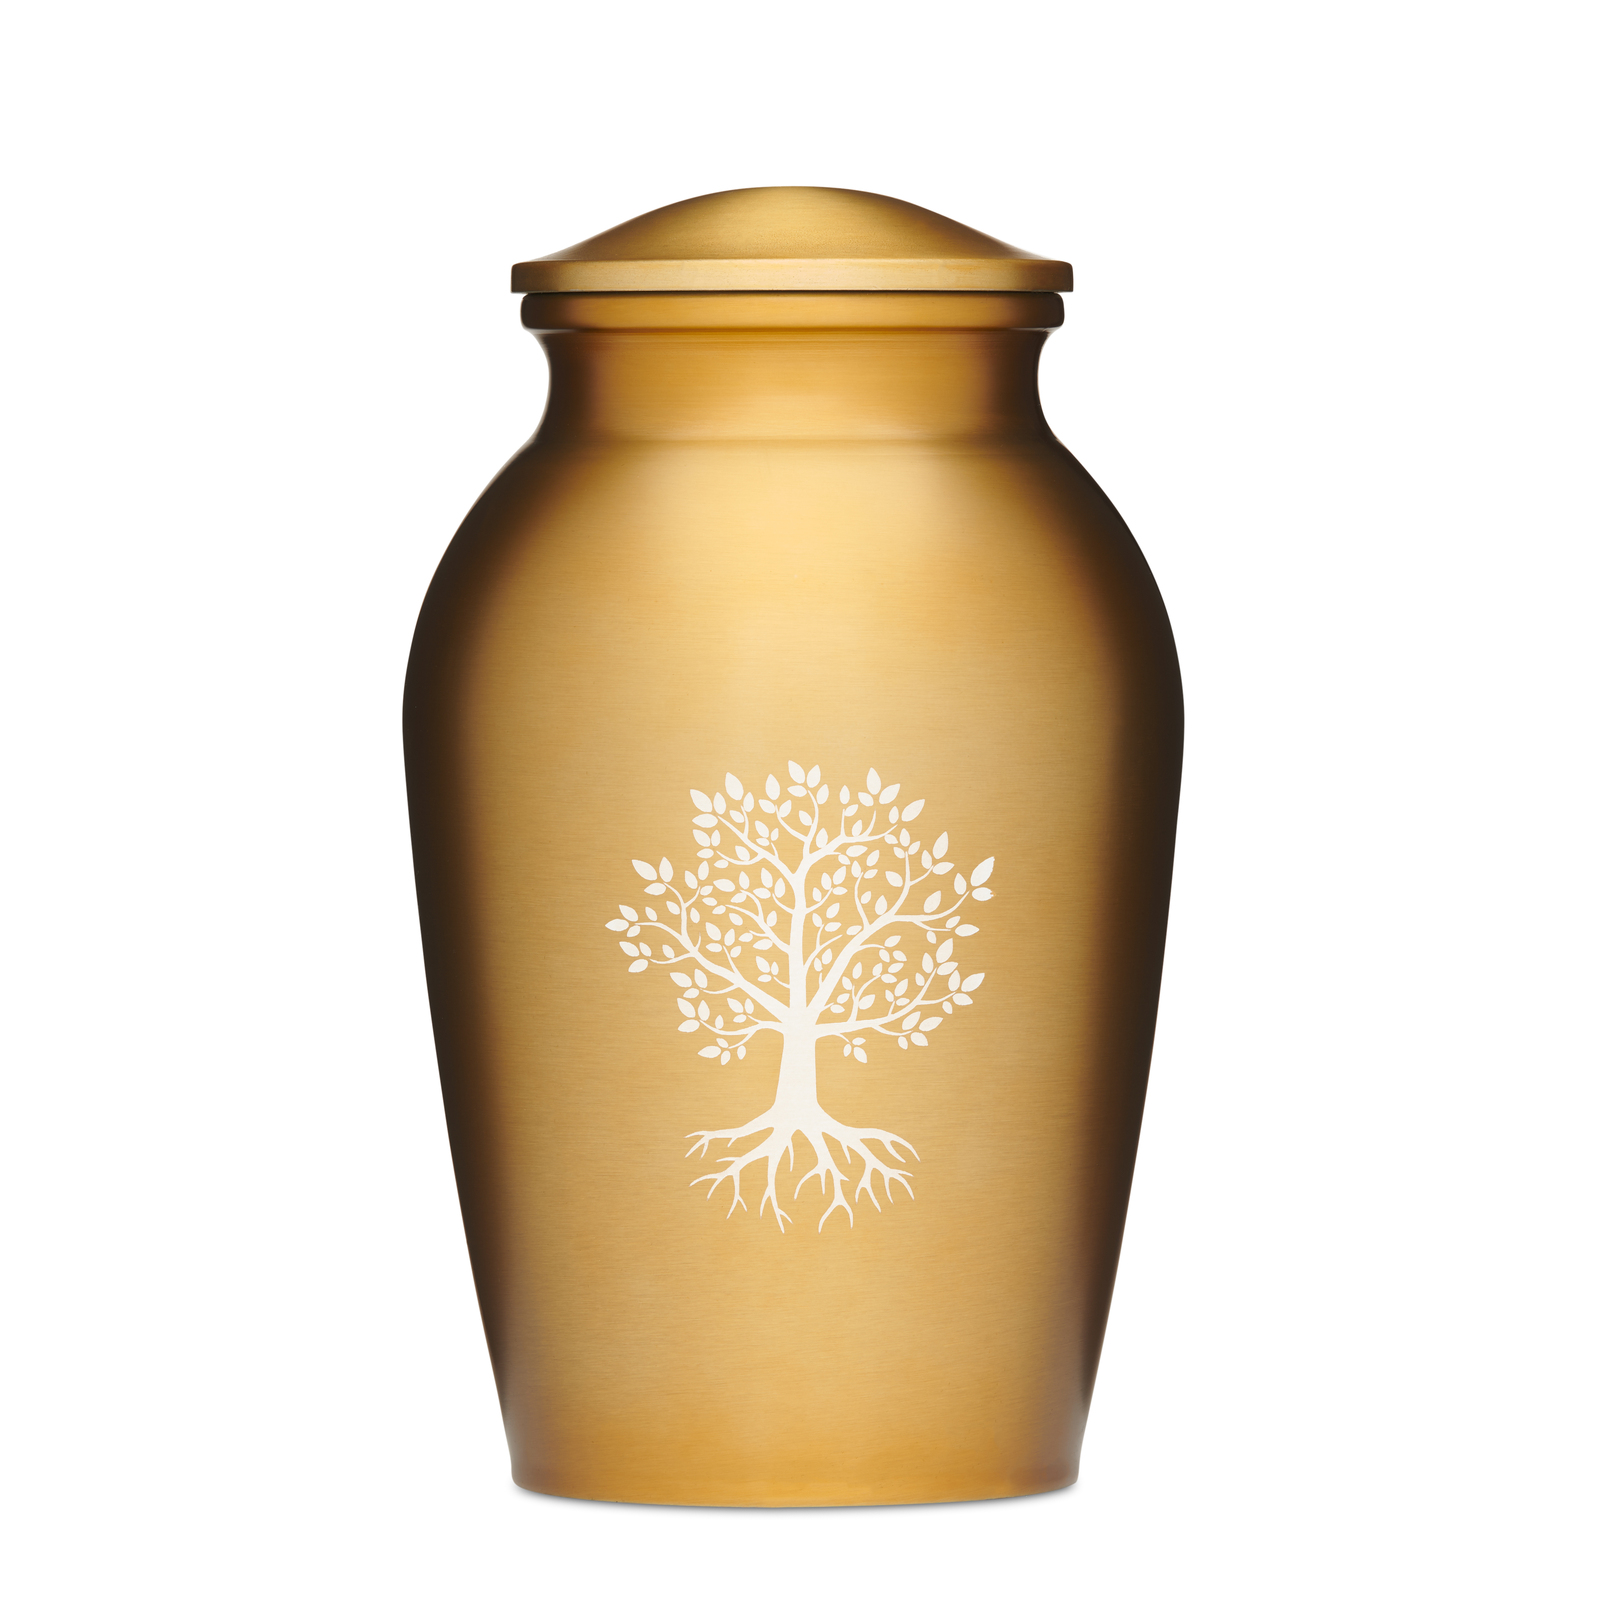 Adult Embrace Pearl Green Tree of Life Cremation Urn